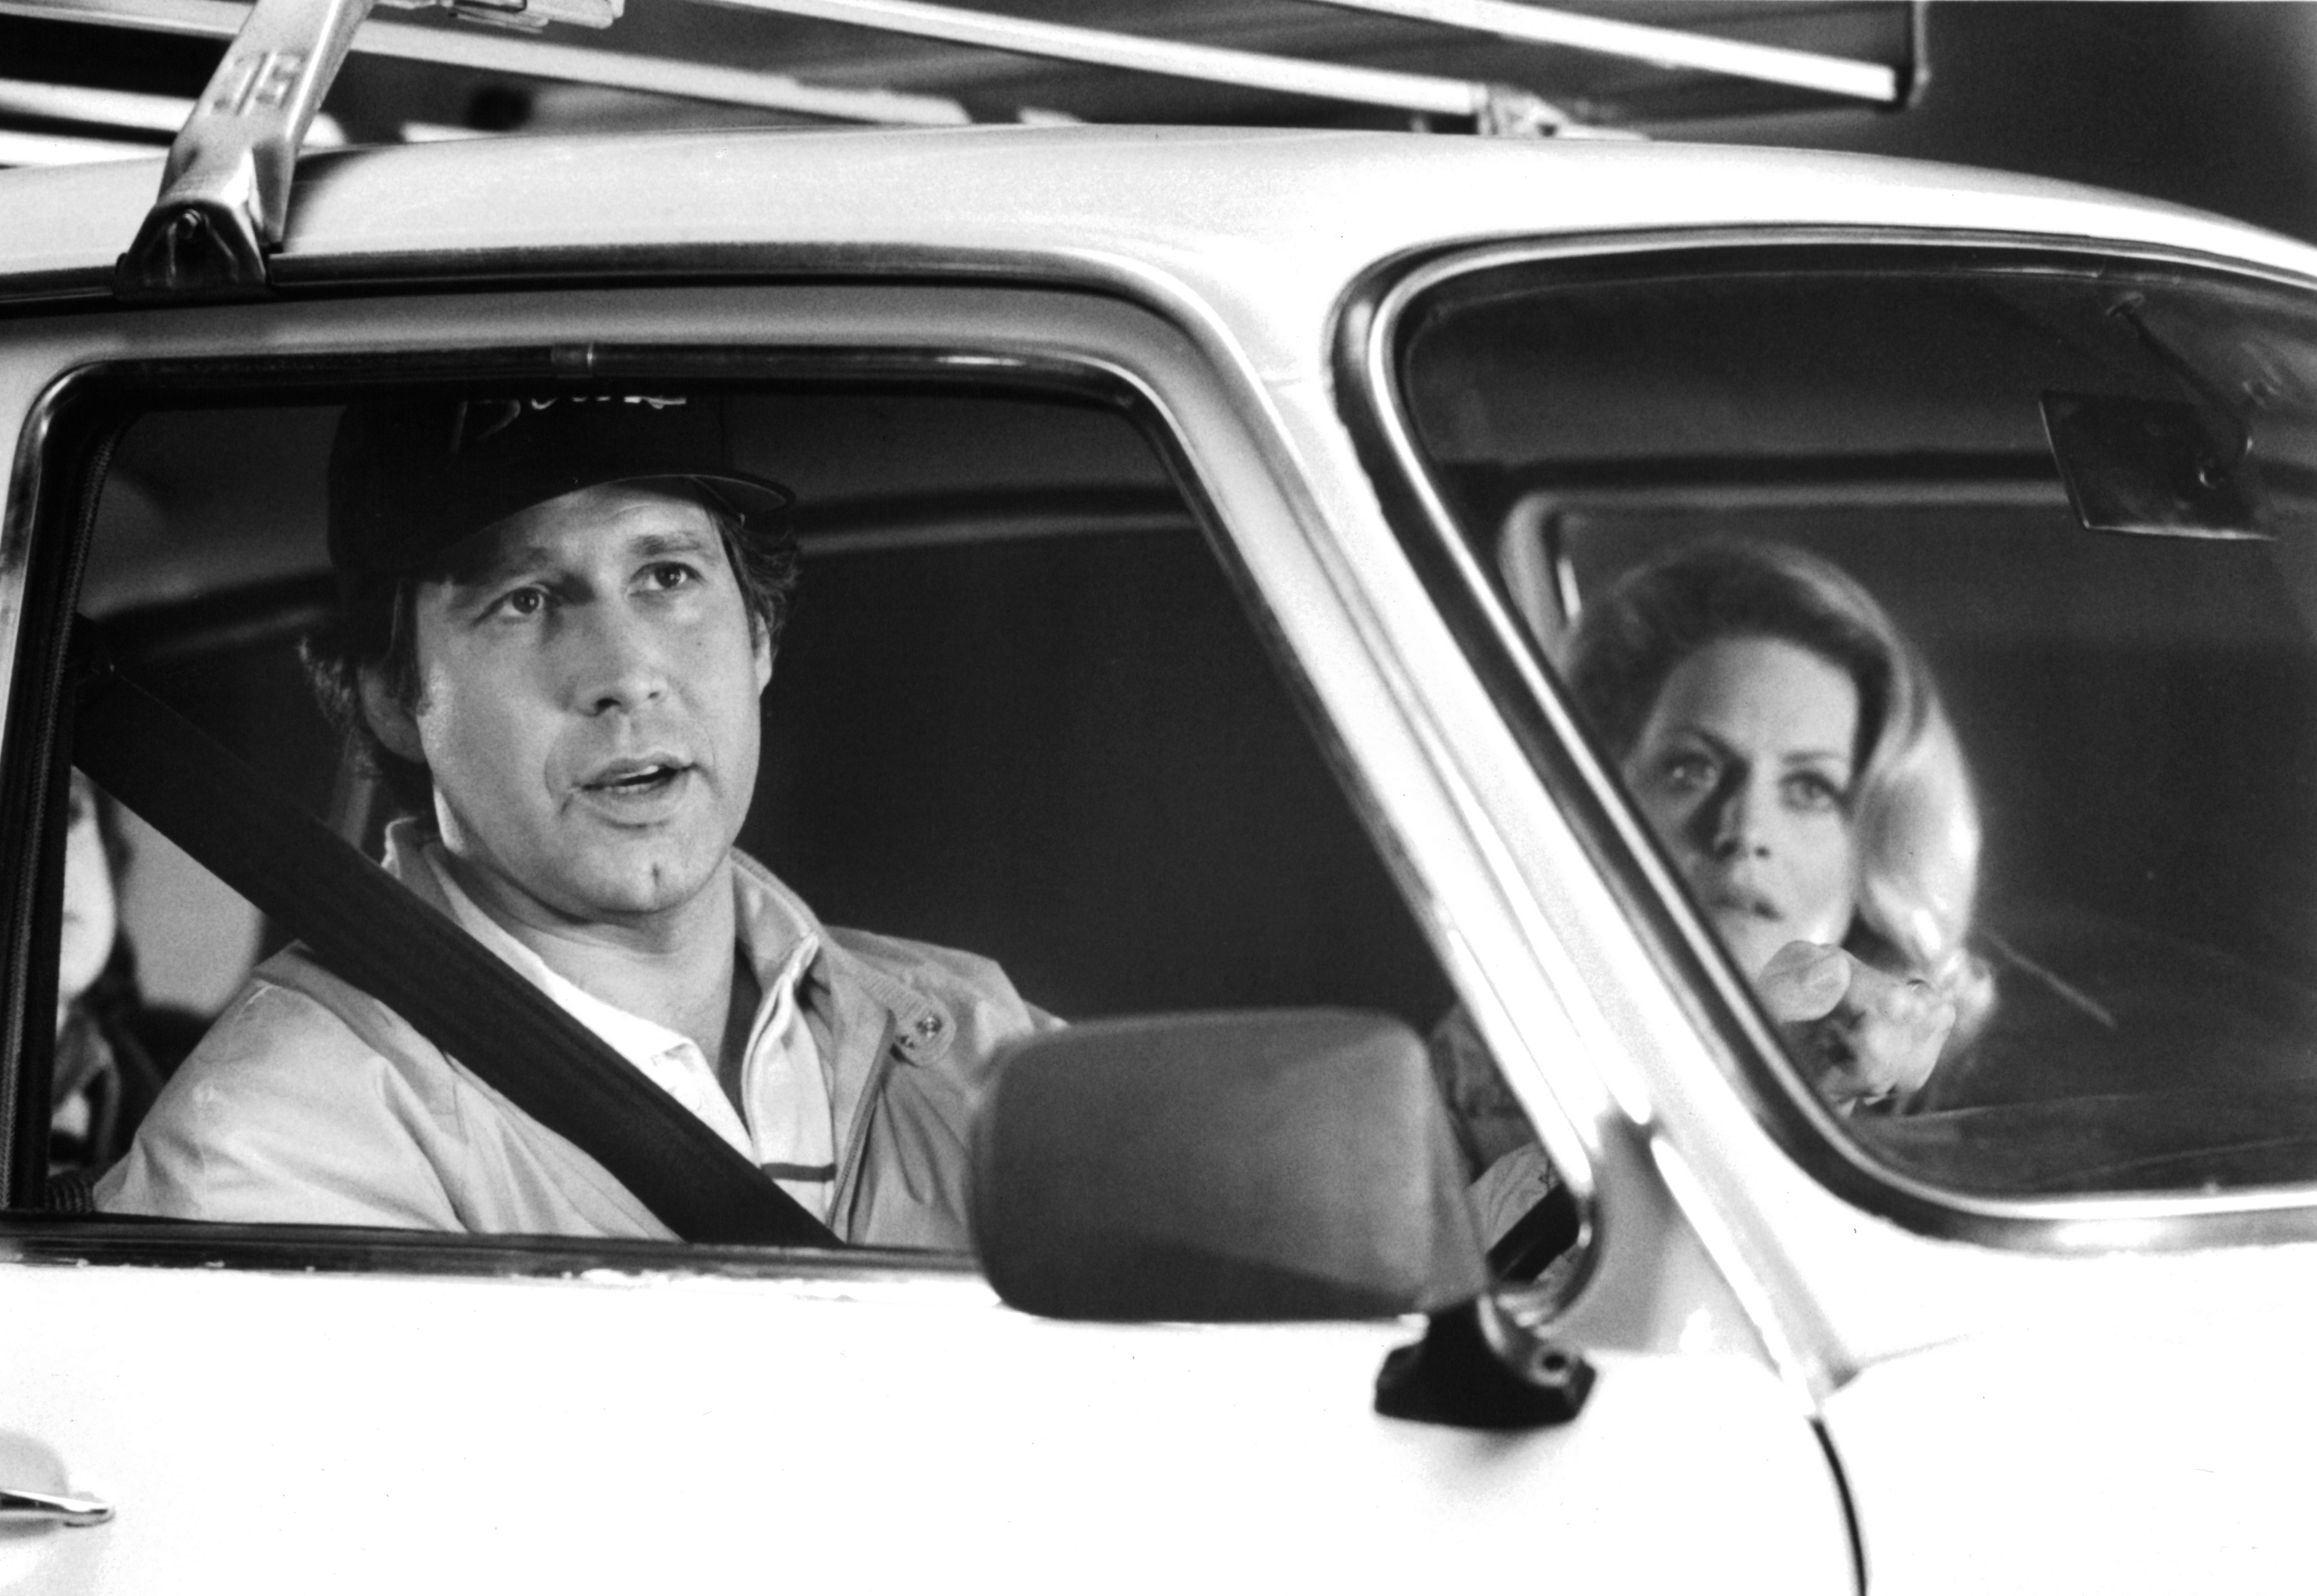 Still of Chevy Chase and Beverly D'Angelo in European Vacation (1985)